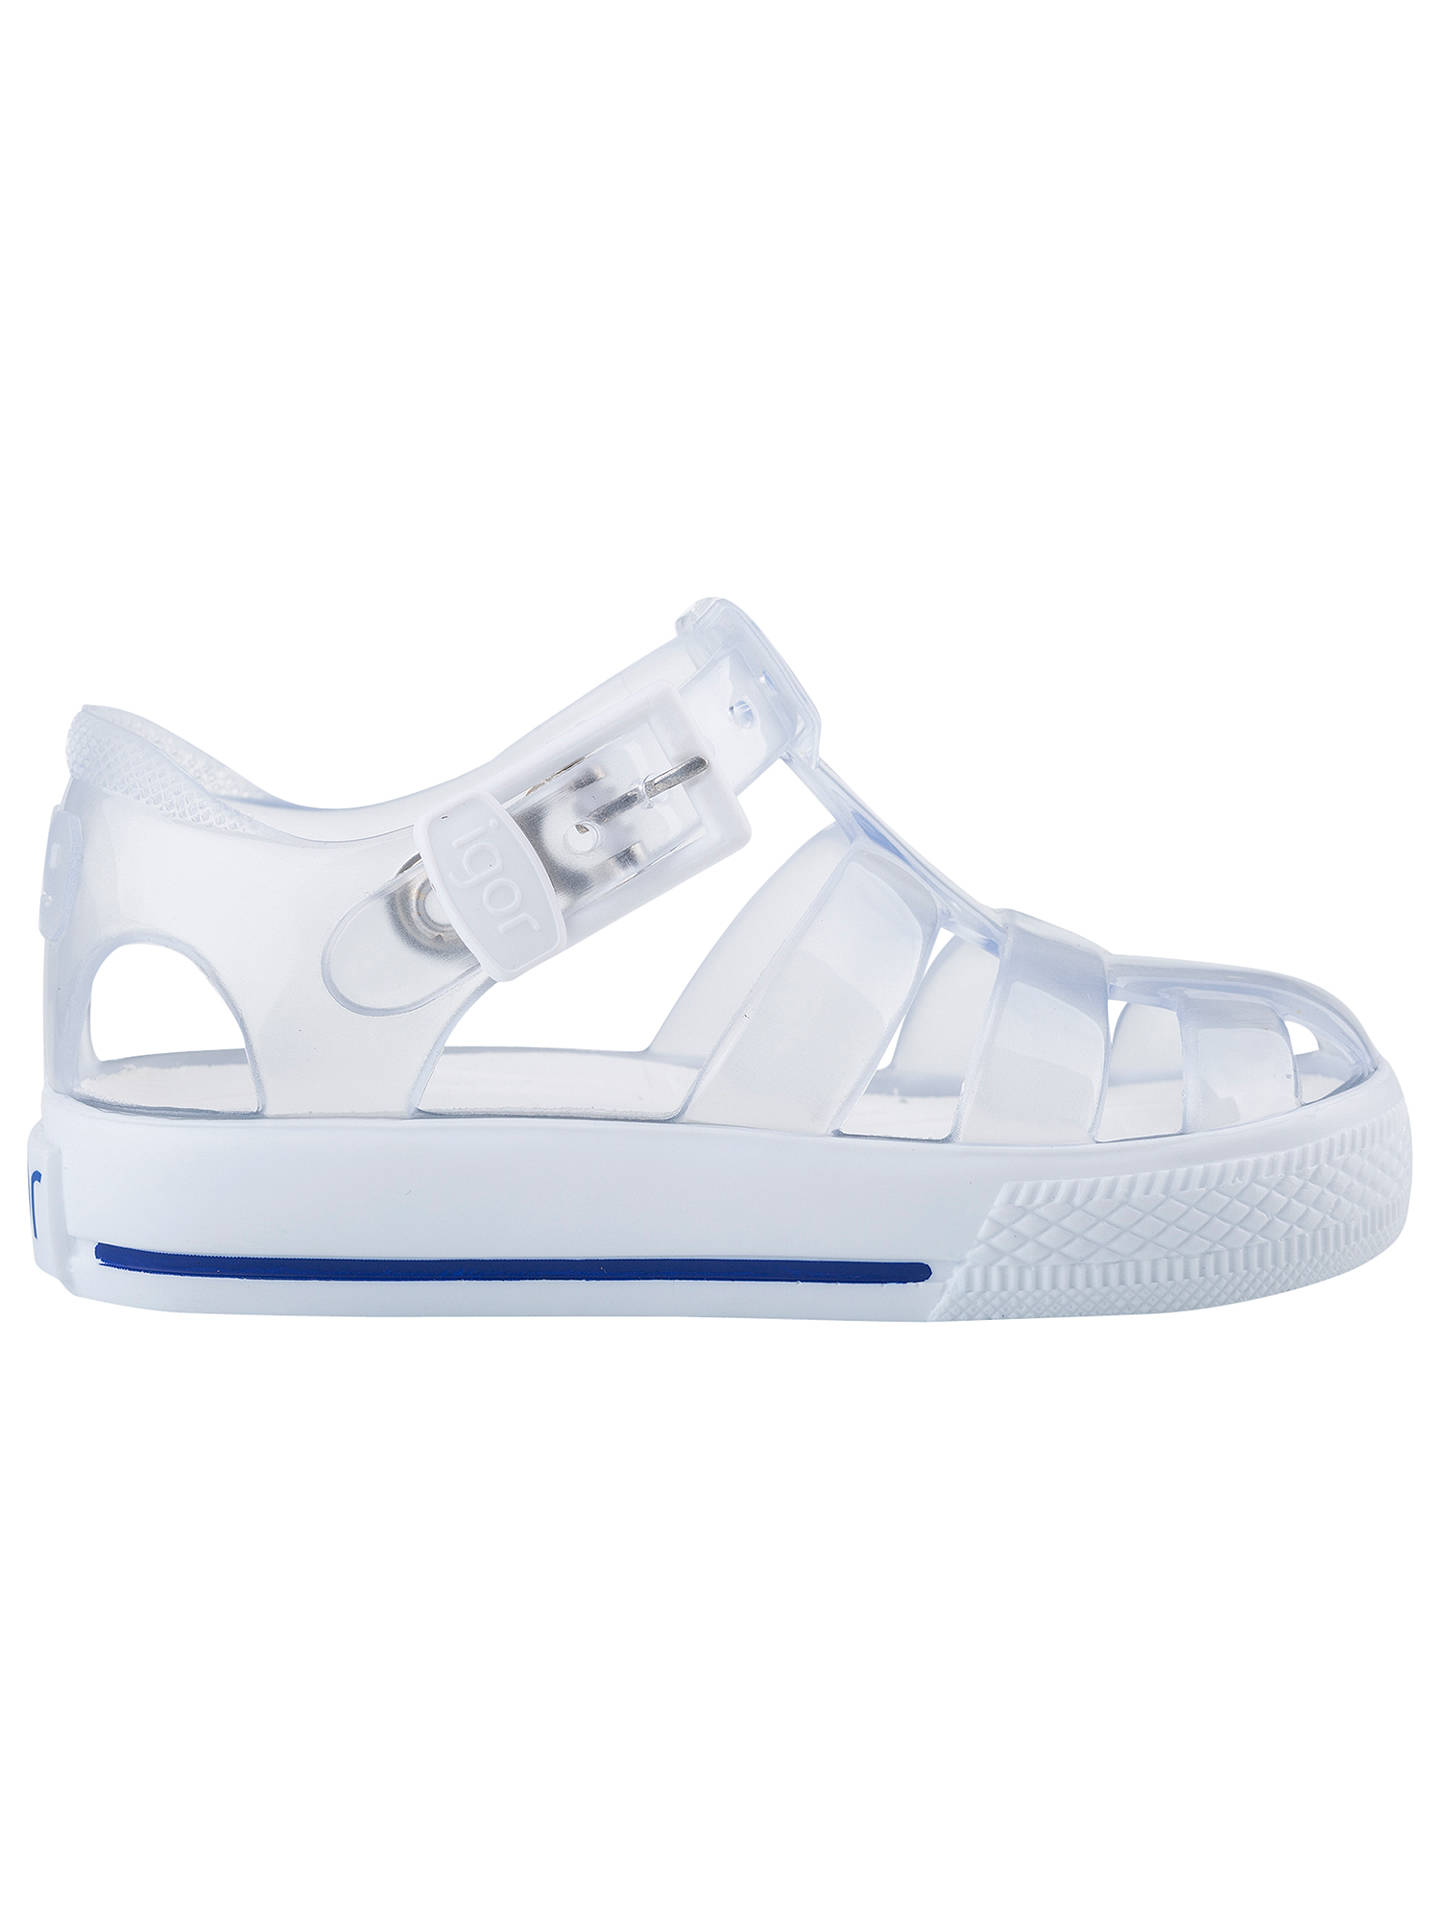 IGOR Children's Tenis Jelly Shoes at John Lewis & Partners